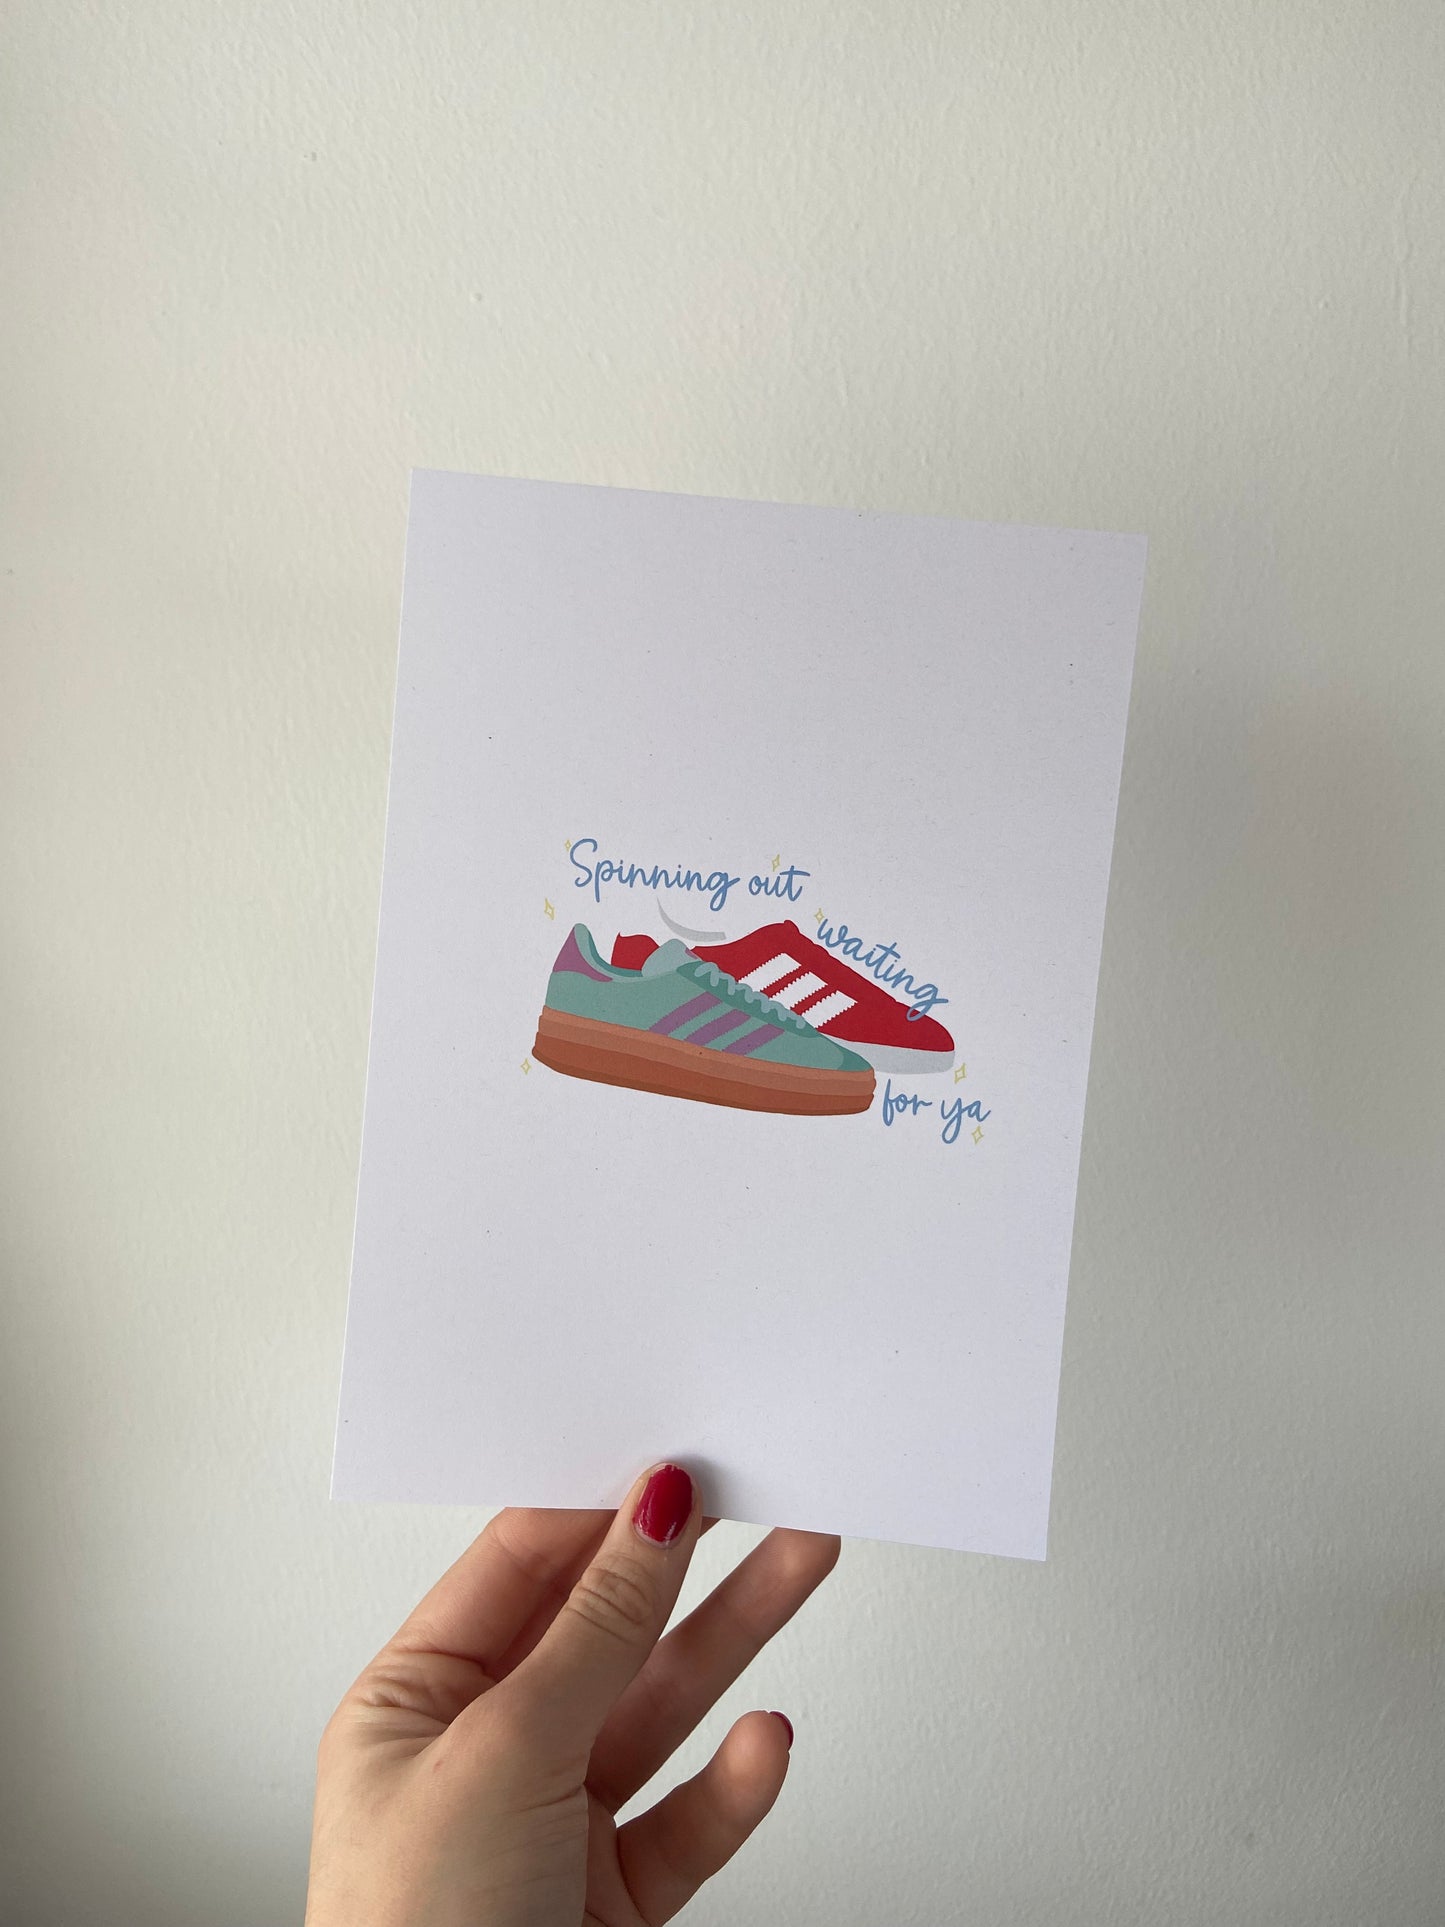 “Spinning out waiting for ya” print. A5. Shoe design